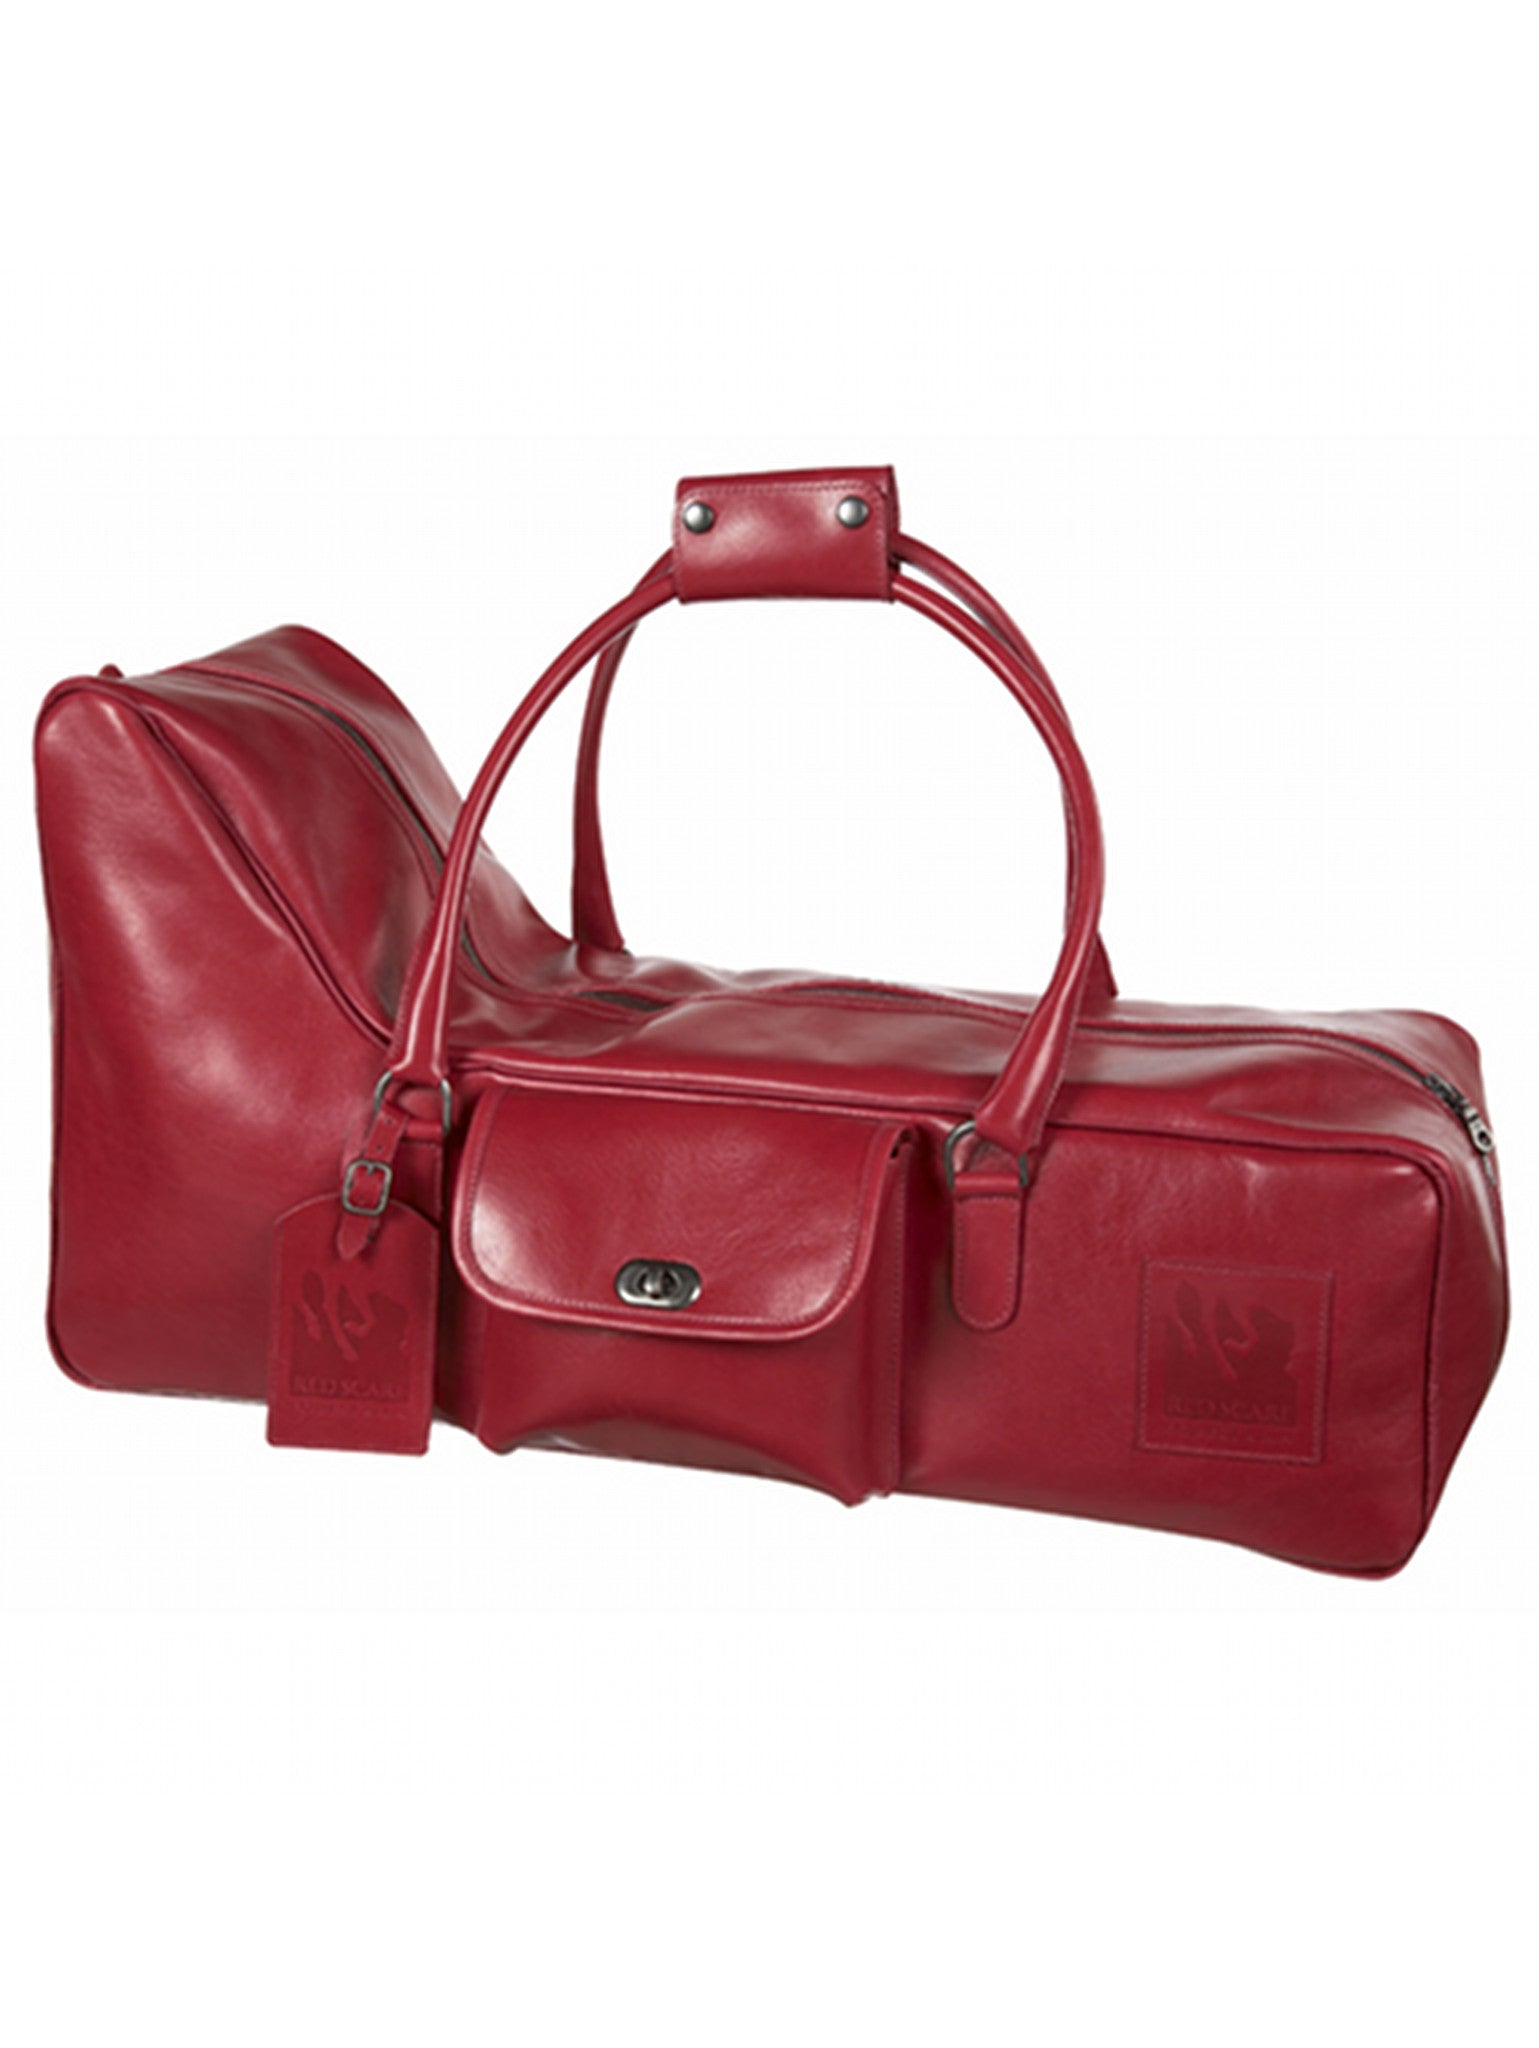 Elite Equestrian Boot Bag Cherry Red 